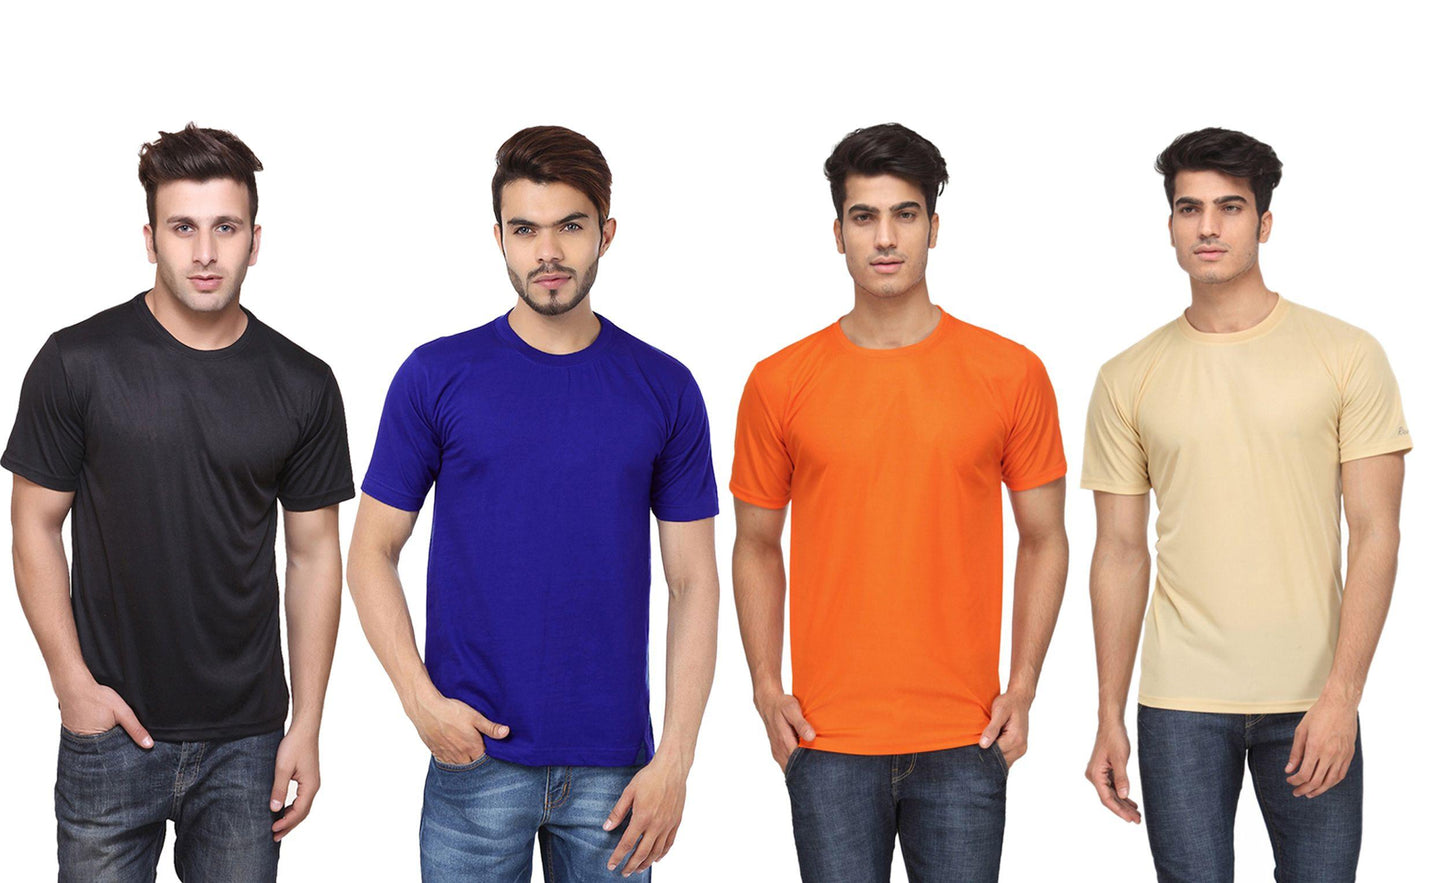 DRI - FIT Round Neck Men's T-shirt (Pack of 4)